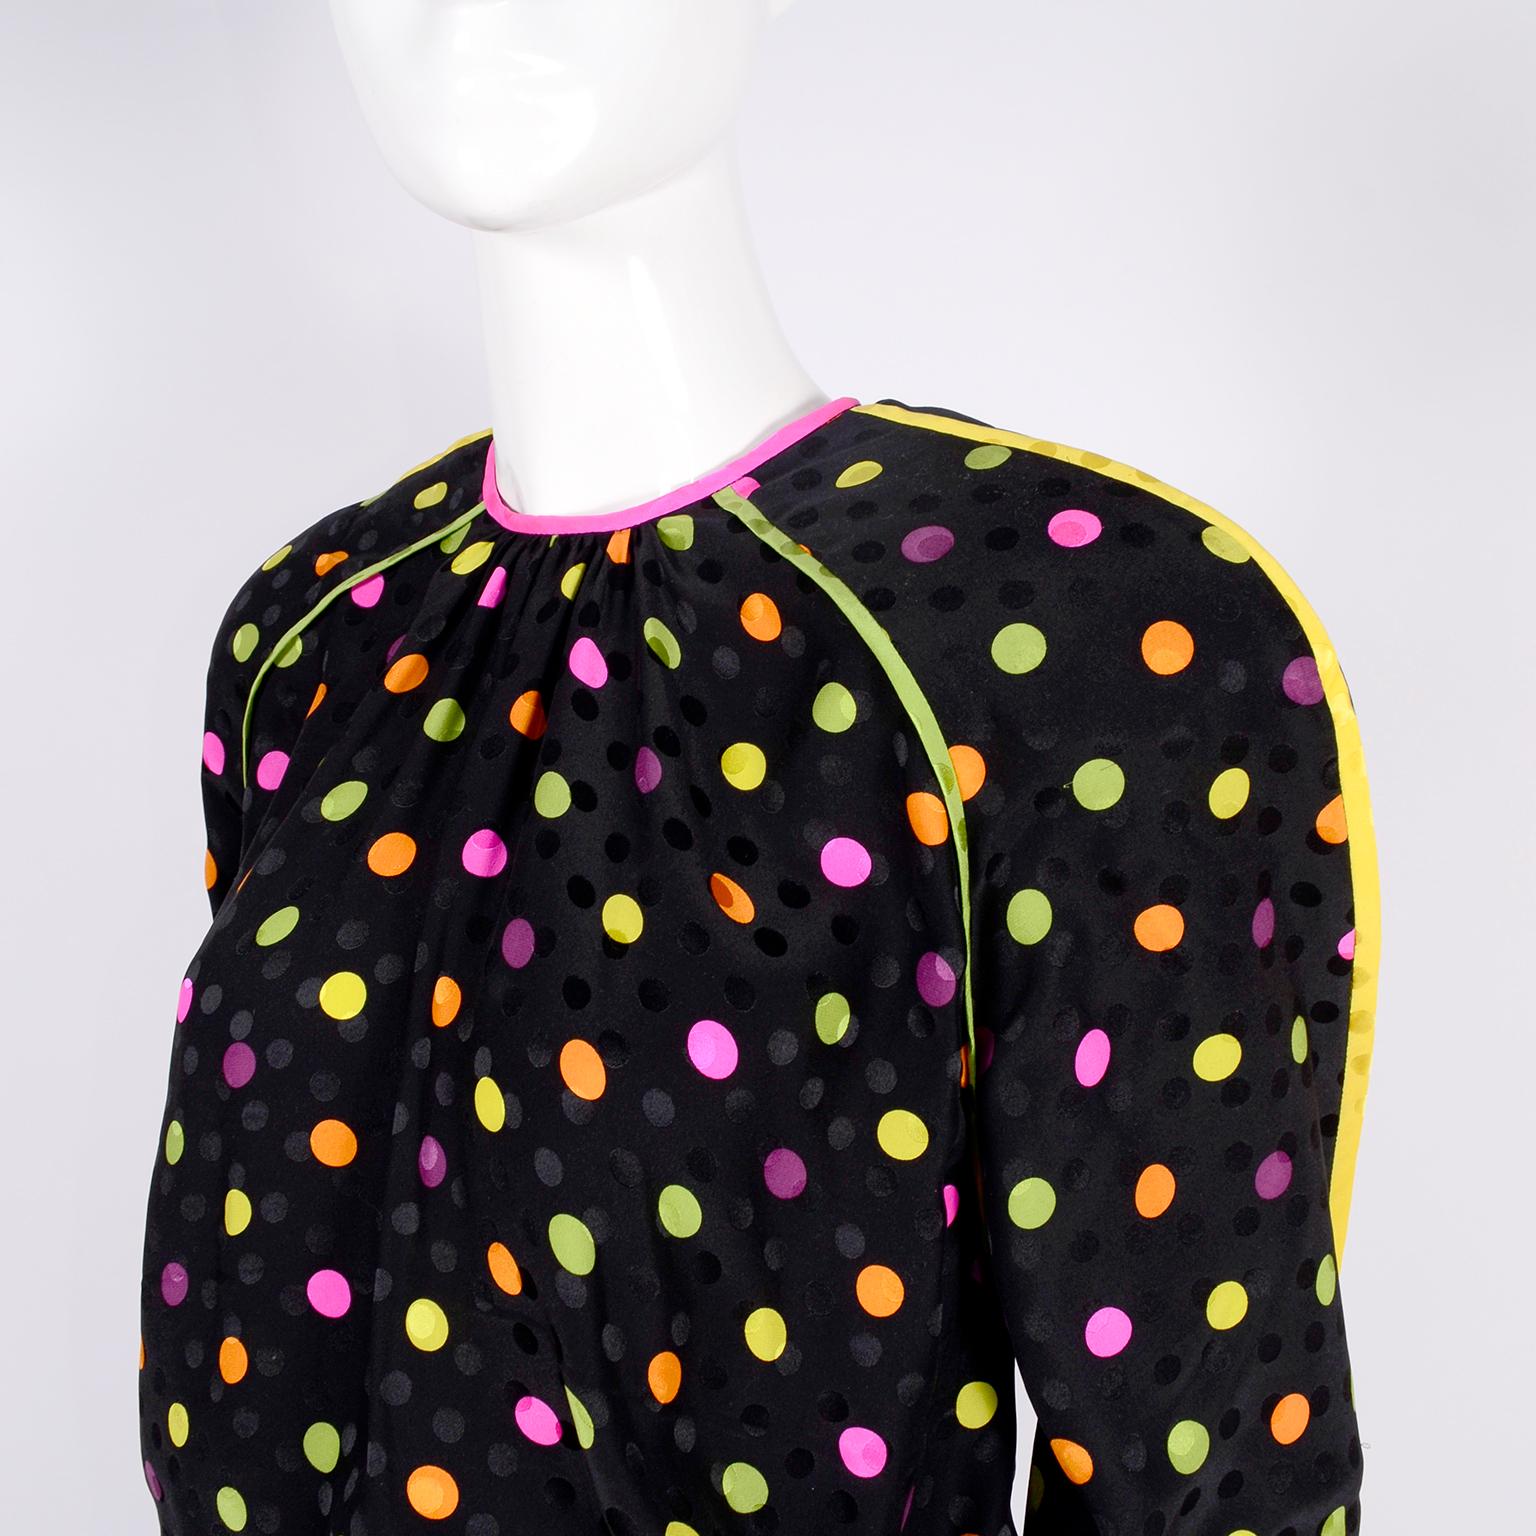 This is a fabulous vintage 1980’s 3 piece dress that looks like it would fit in on today's runways! The fabric is a black silk with tone in tone black dots and a colorful abstract paisley print on the skirt and multi colored dots on the top. The top